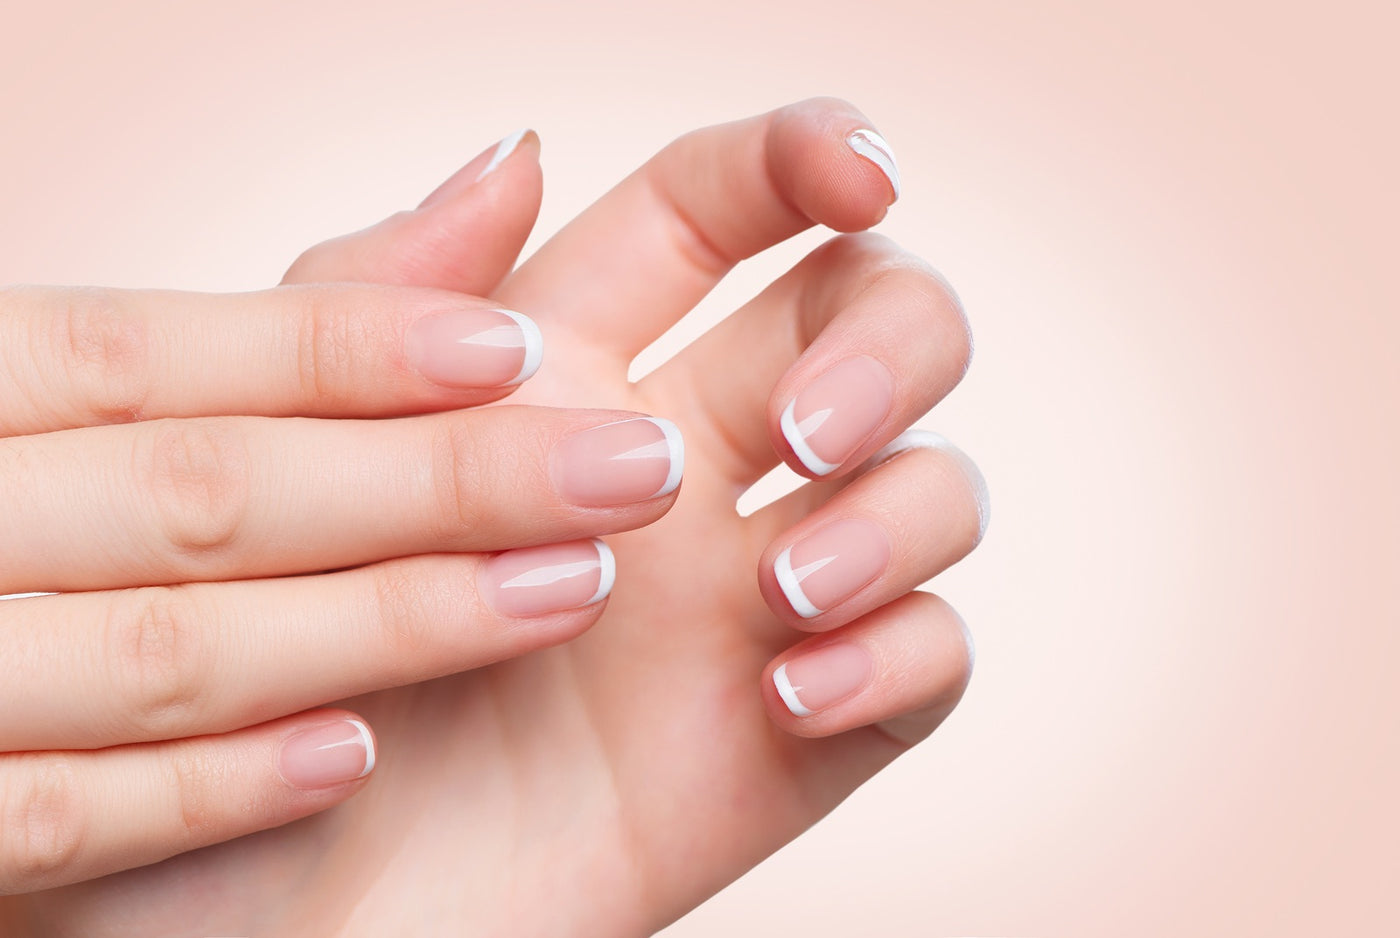 grow nails fast, pretty nails, manicure